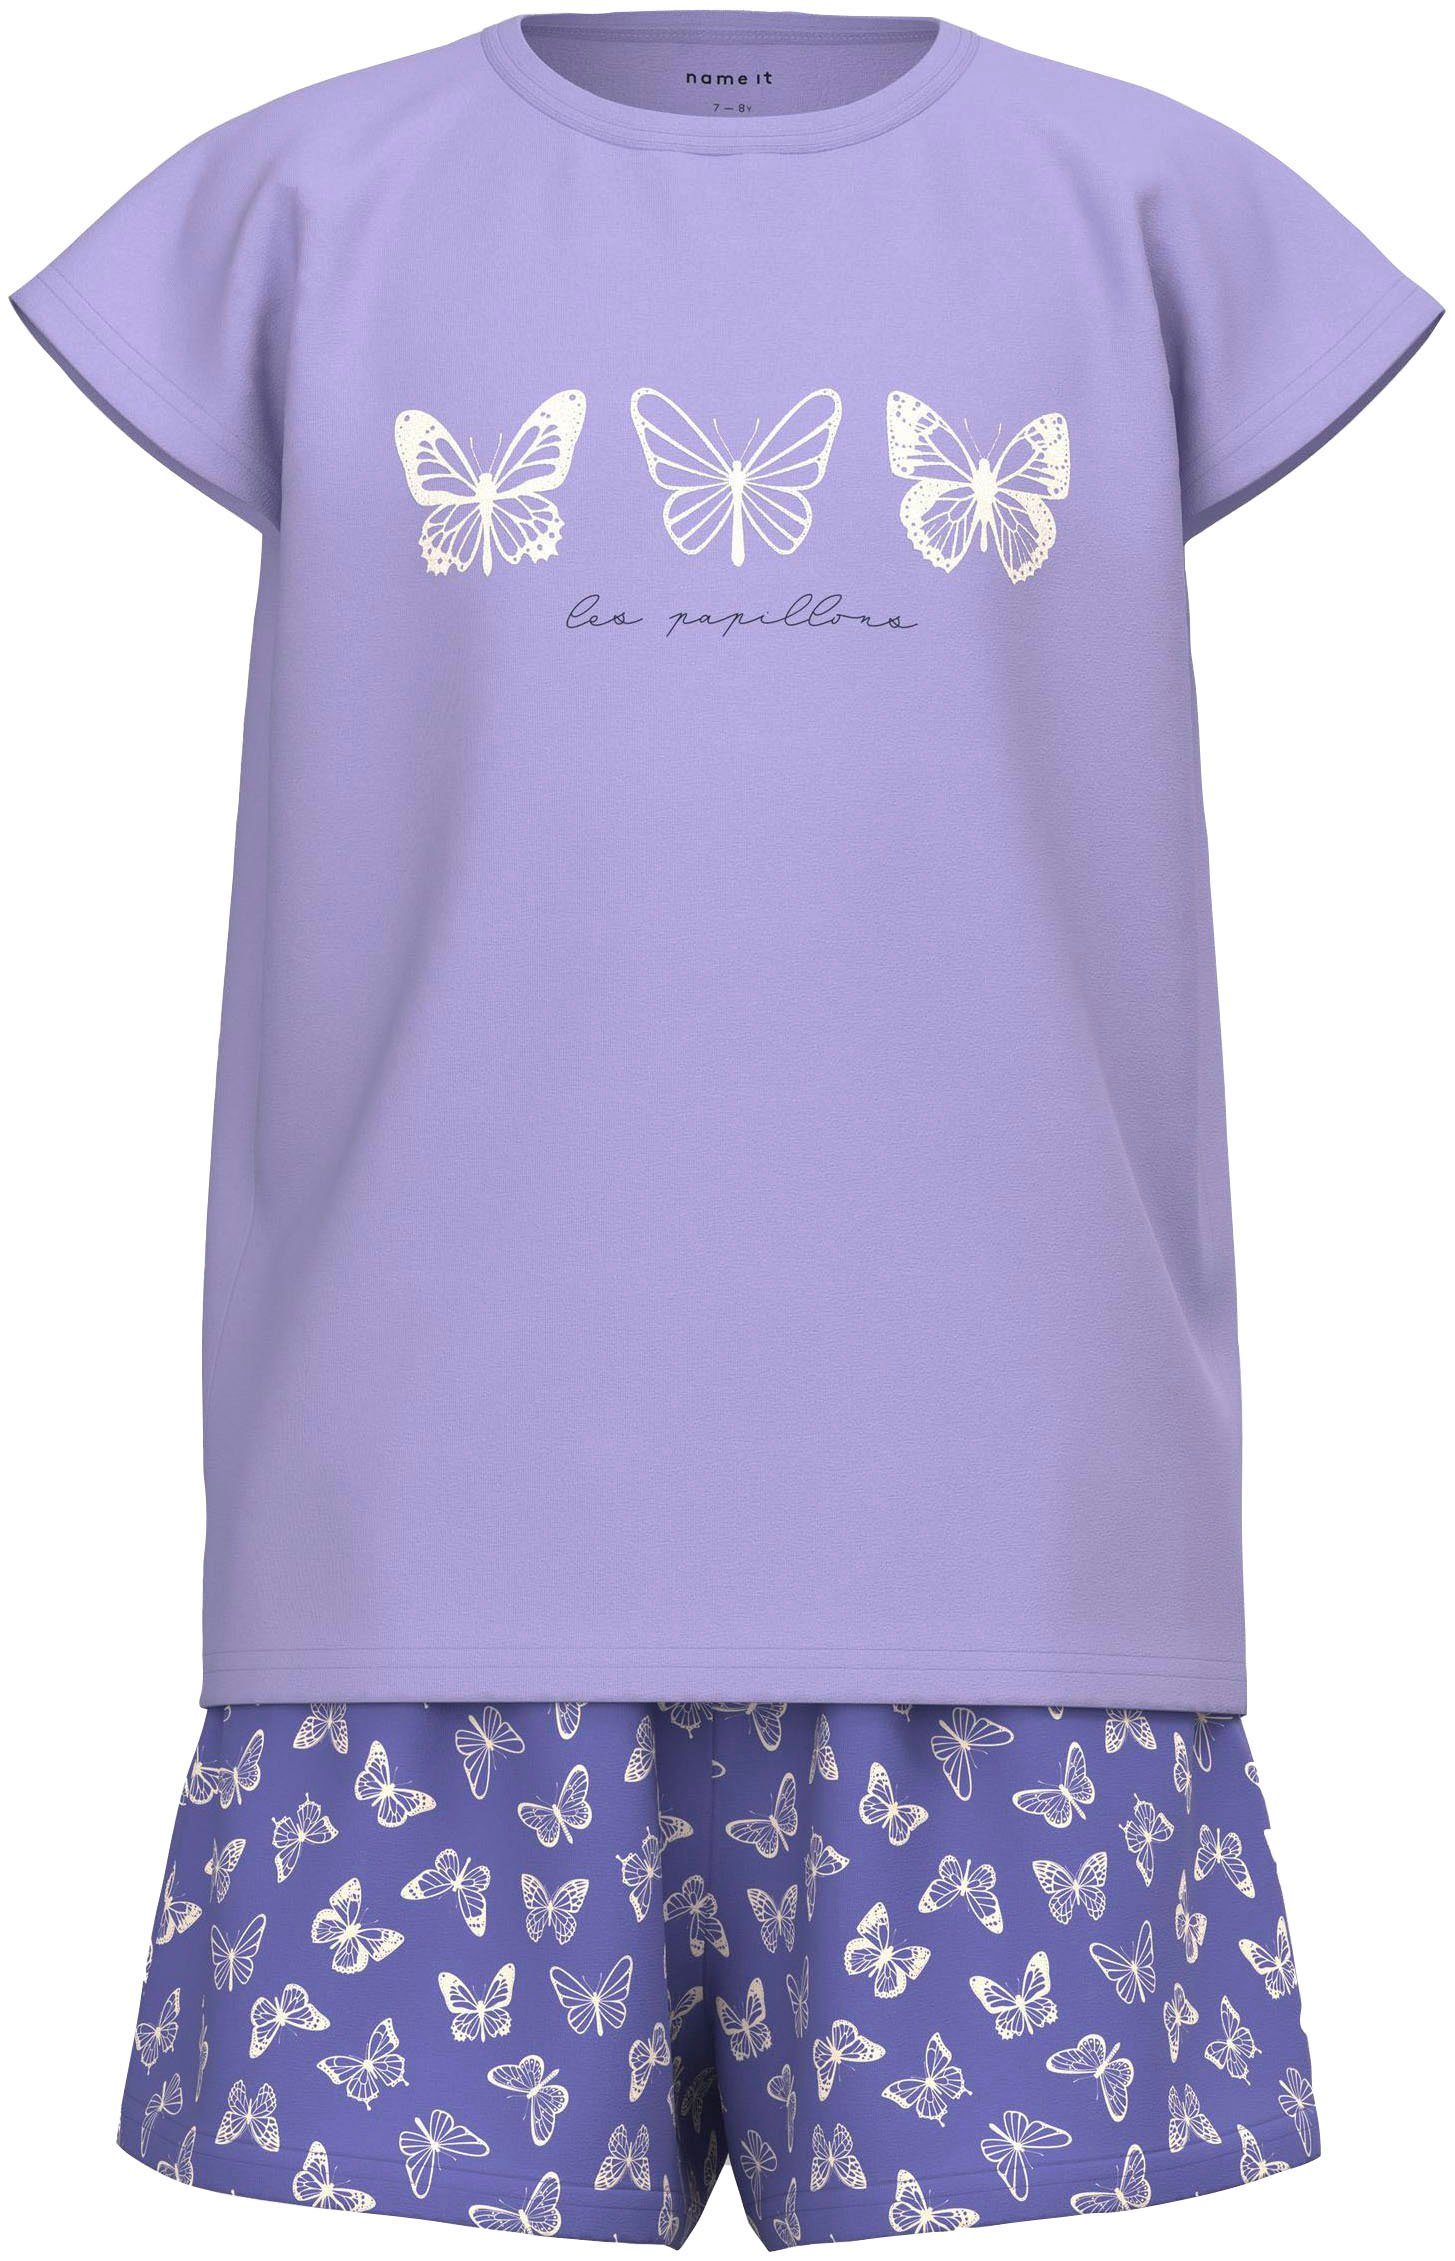 It NOOS Schmetterling tlg) BUTTERFLY NKFNIGHTSET mit CAP Name Shorty (Packung, 2 Druck